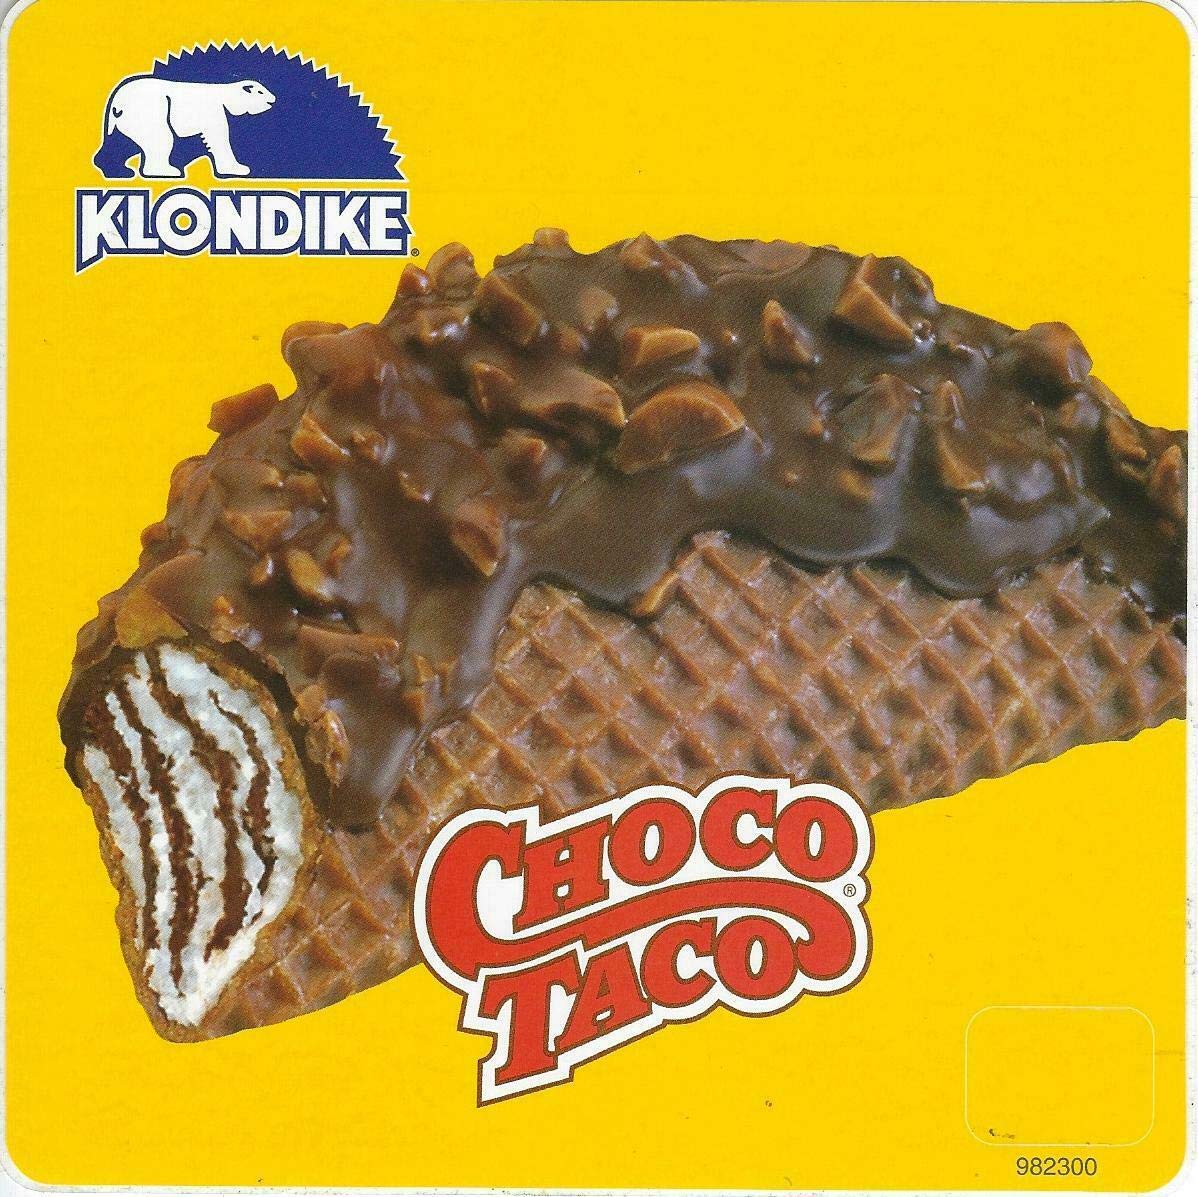 The case against invoking the Defense Production Act to save the Choco Taco